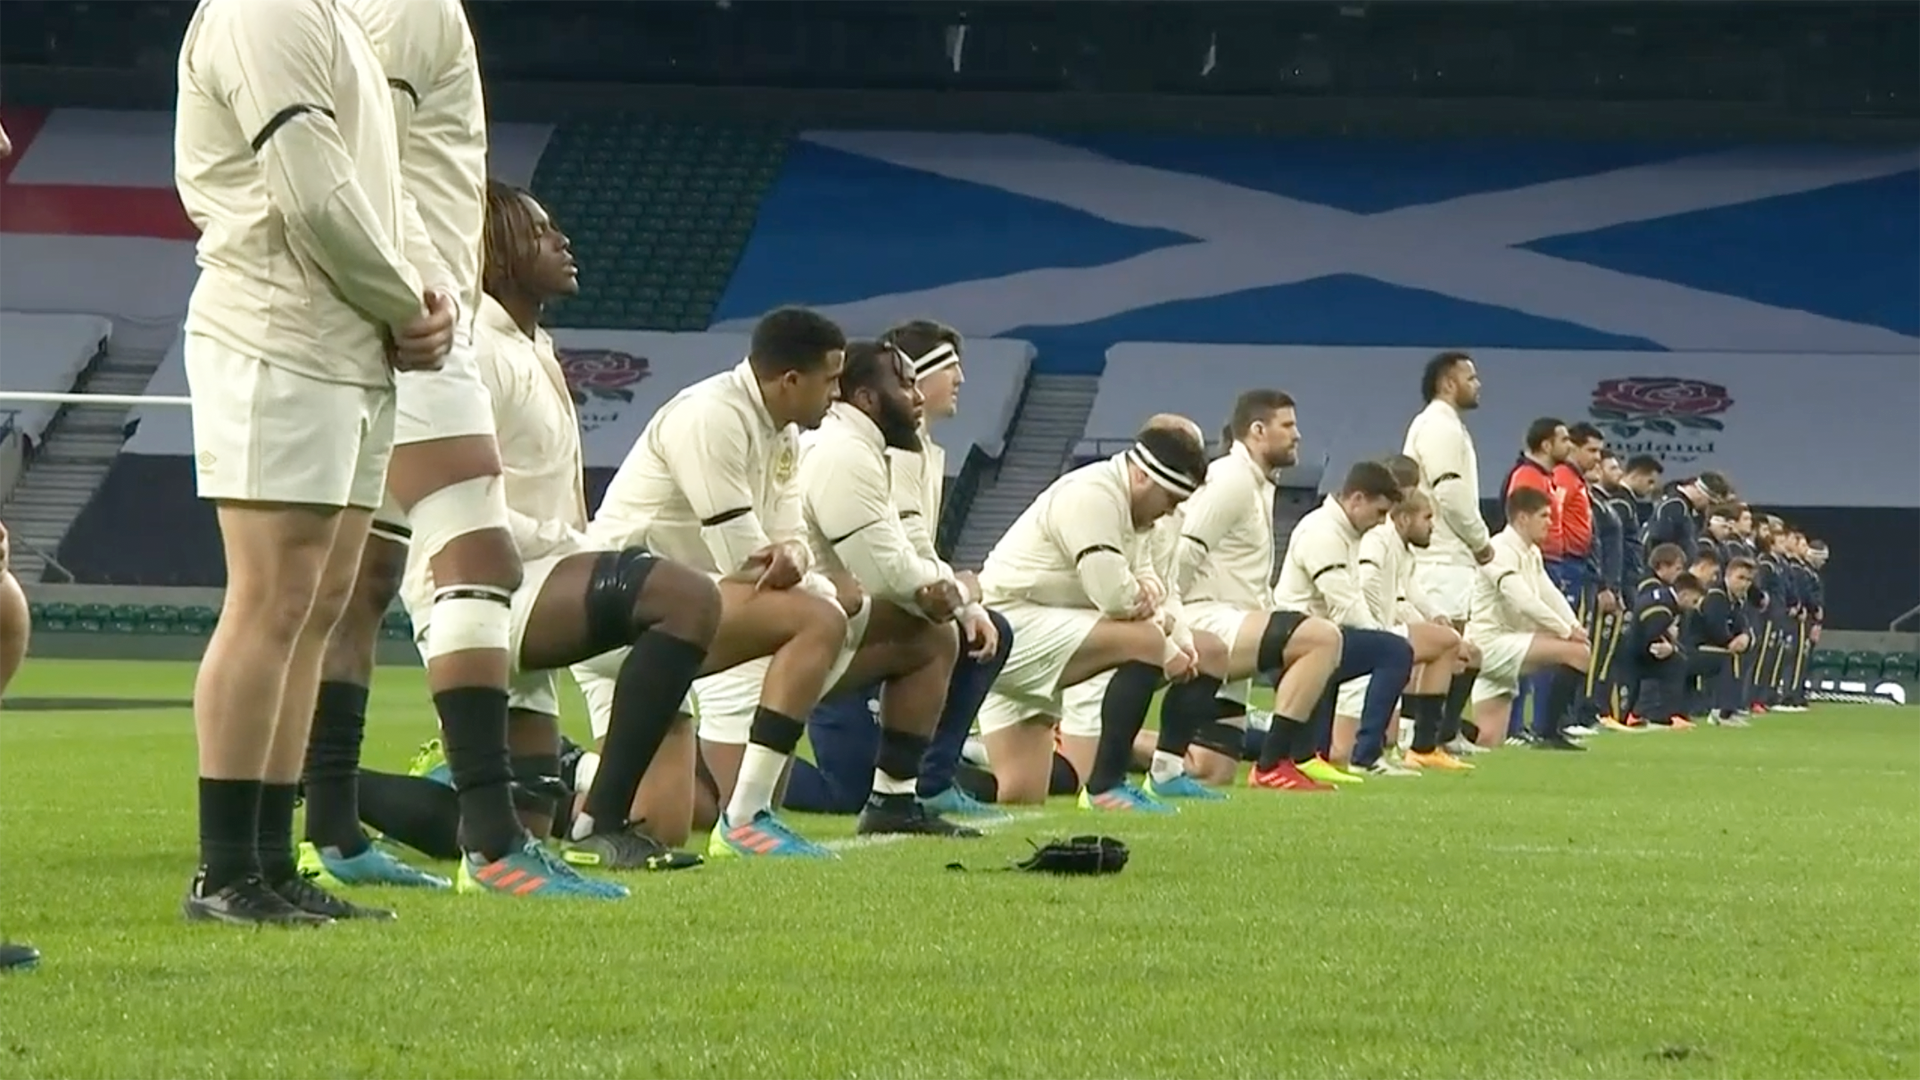 'If they kneel again today, I'll be an Italian for eighty minutes' - social media storm ahead of England rugby showdown